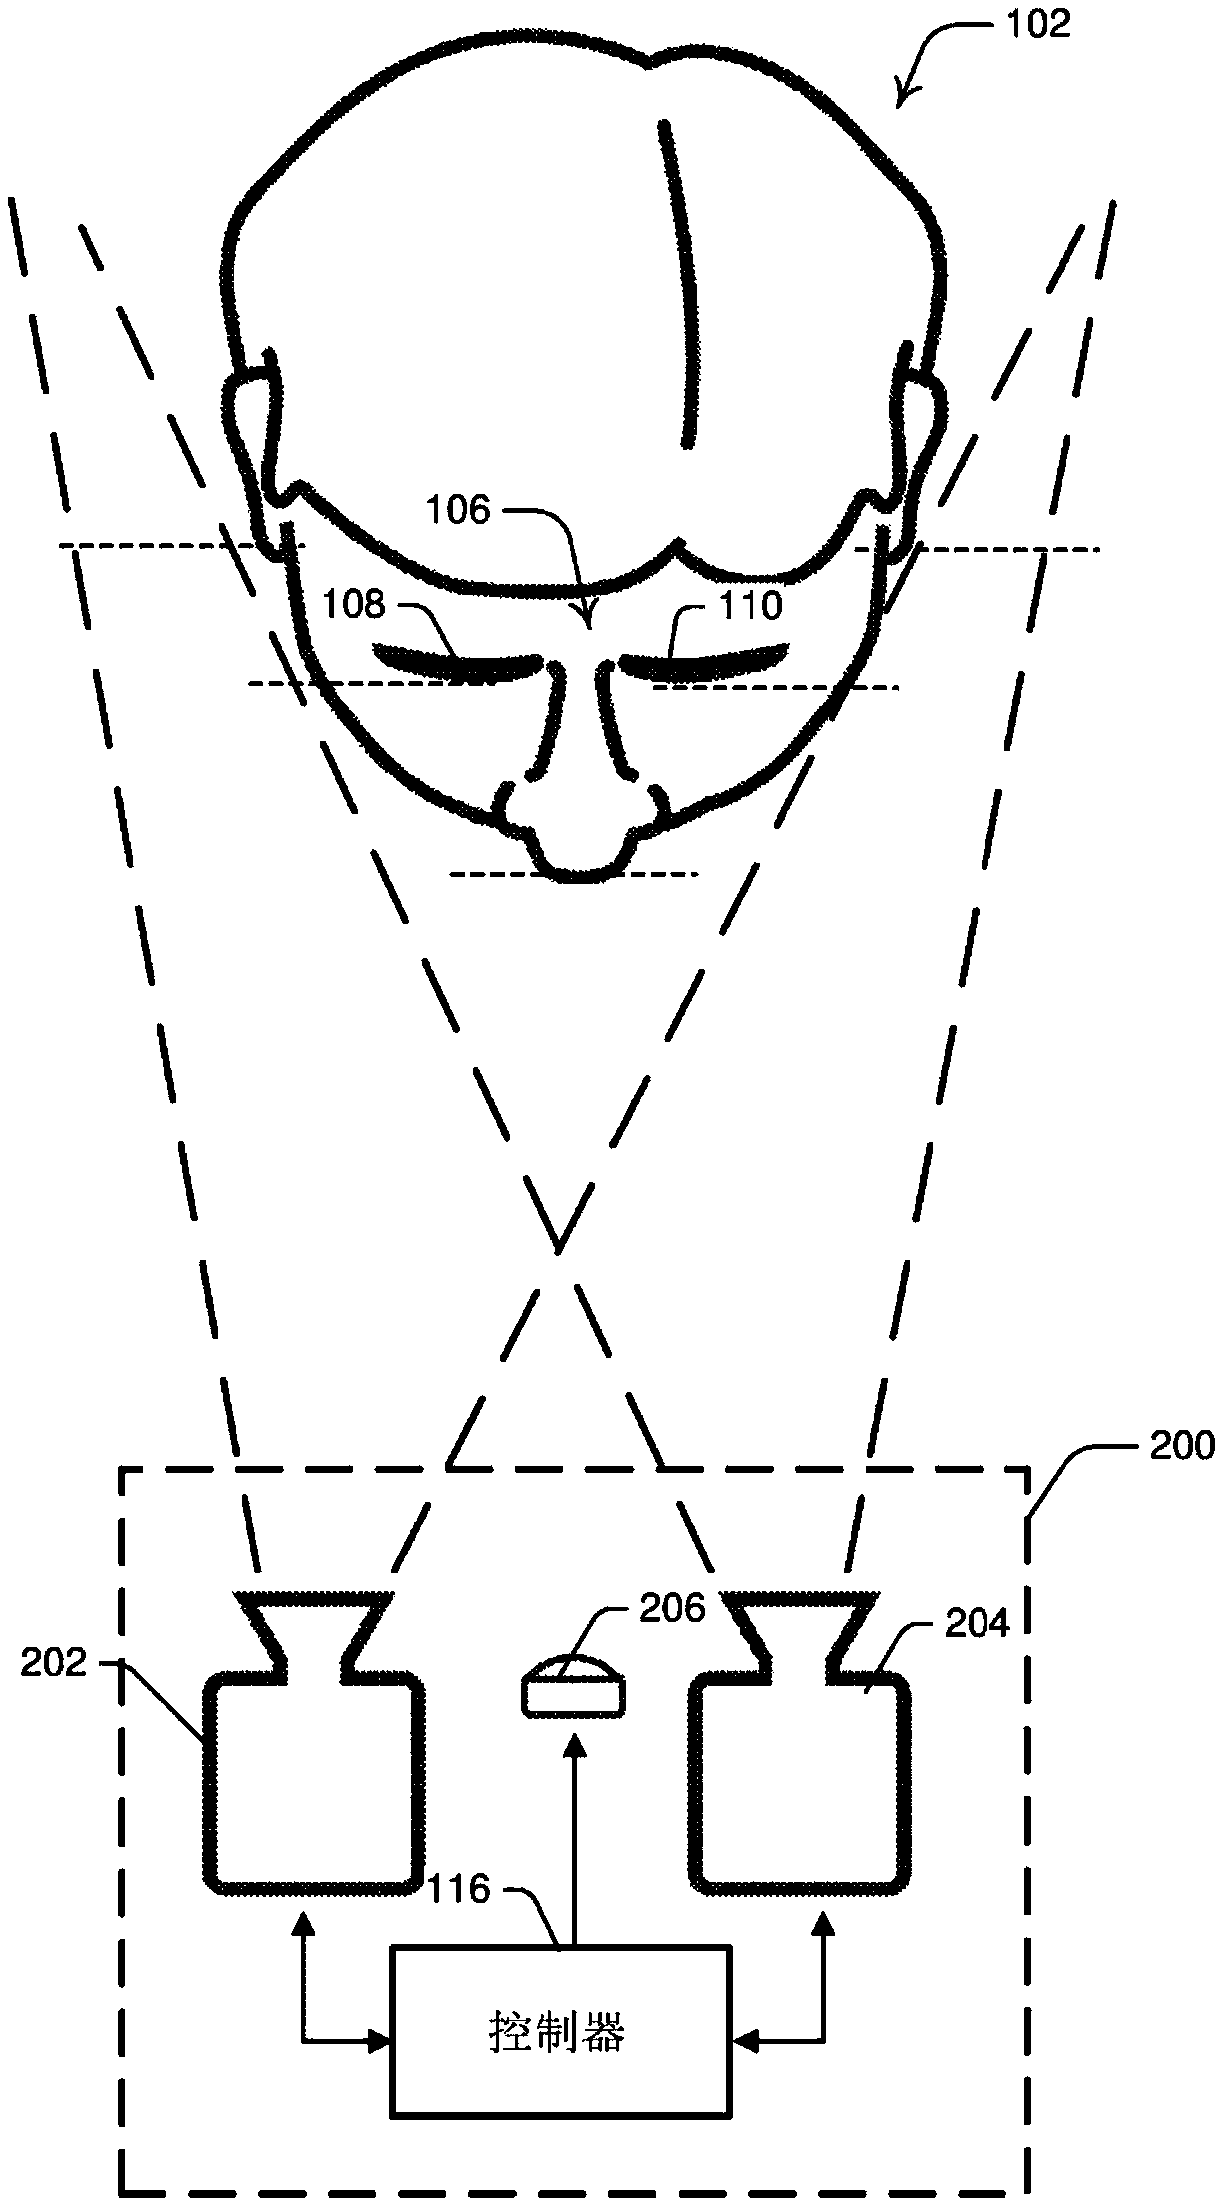 Systems and methods for performing eye gaze tracking